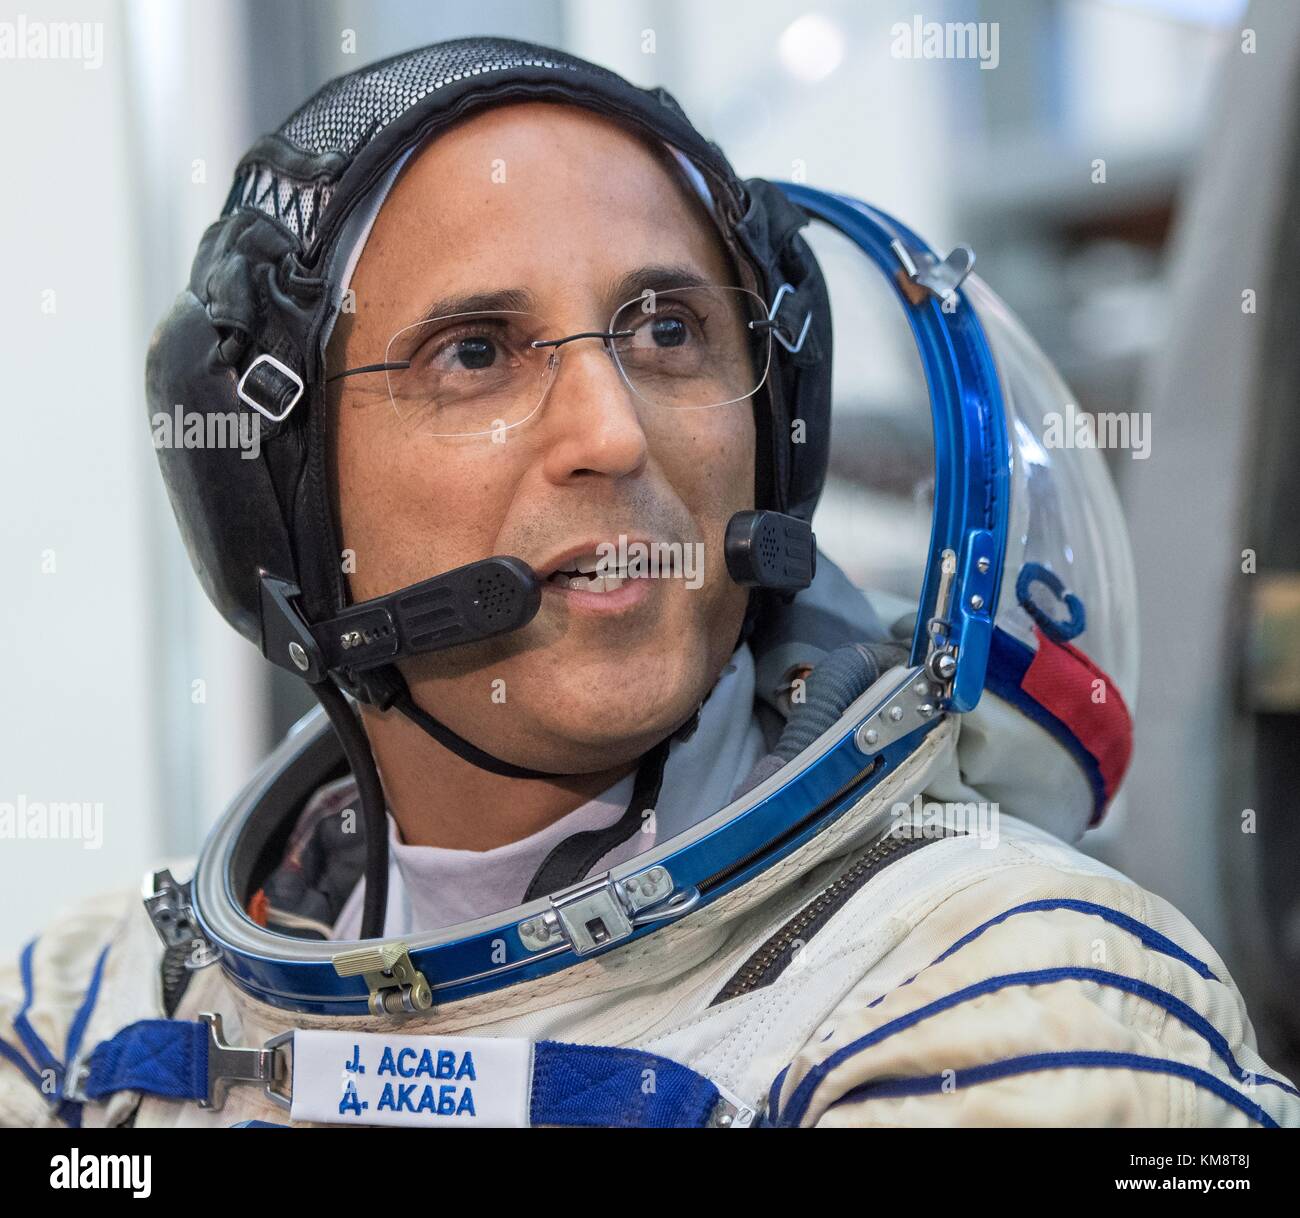 NASA International Space Station (ISS) Expedition 53 prime crew member American astronaut Joe Acaba prepares for his Soyuz qualification exams outside the Soyuz simulator prior to the Soyuz MS-06 spacecraft launch at the Gagarin Cosmonaut Training Center August 31, 2017 in Star City, Russia.  (photo by Bill Ingalls  via Planetpix) Stock Photo